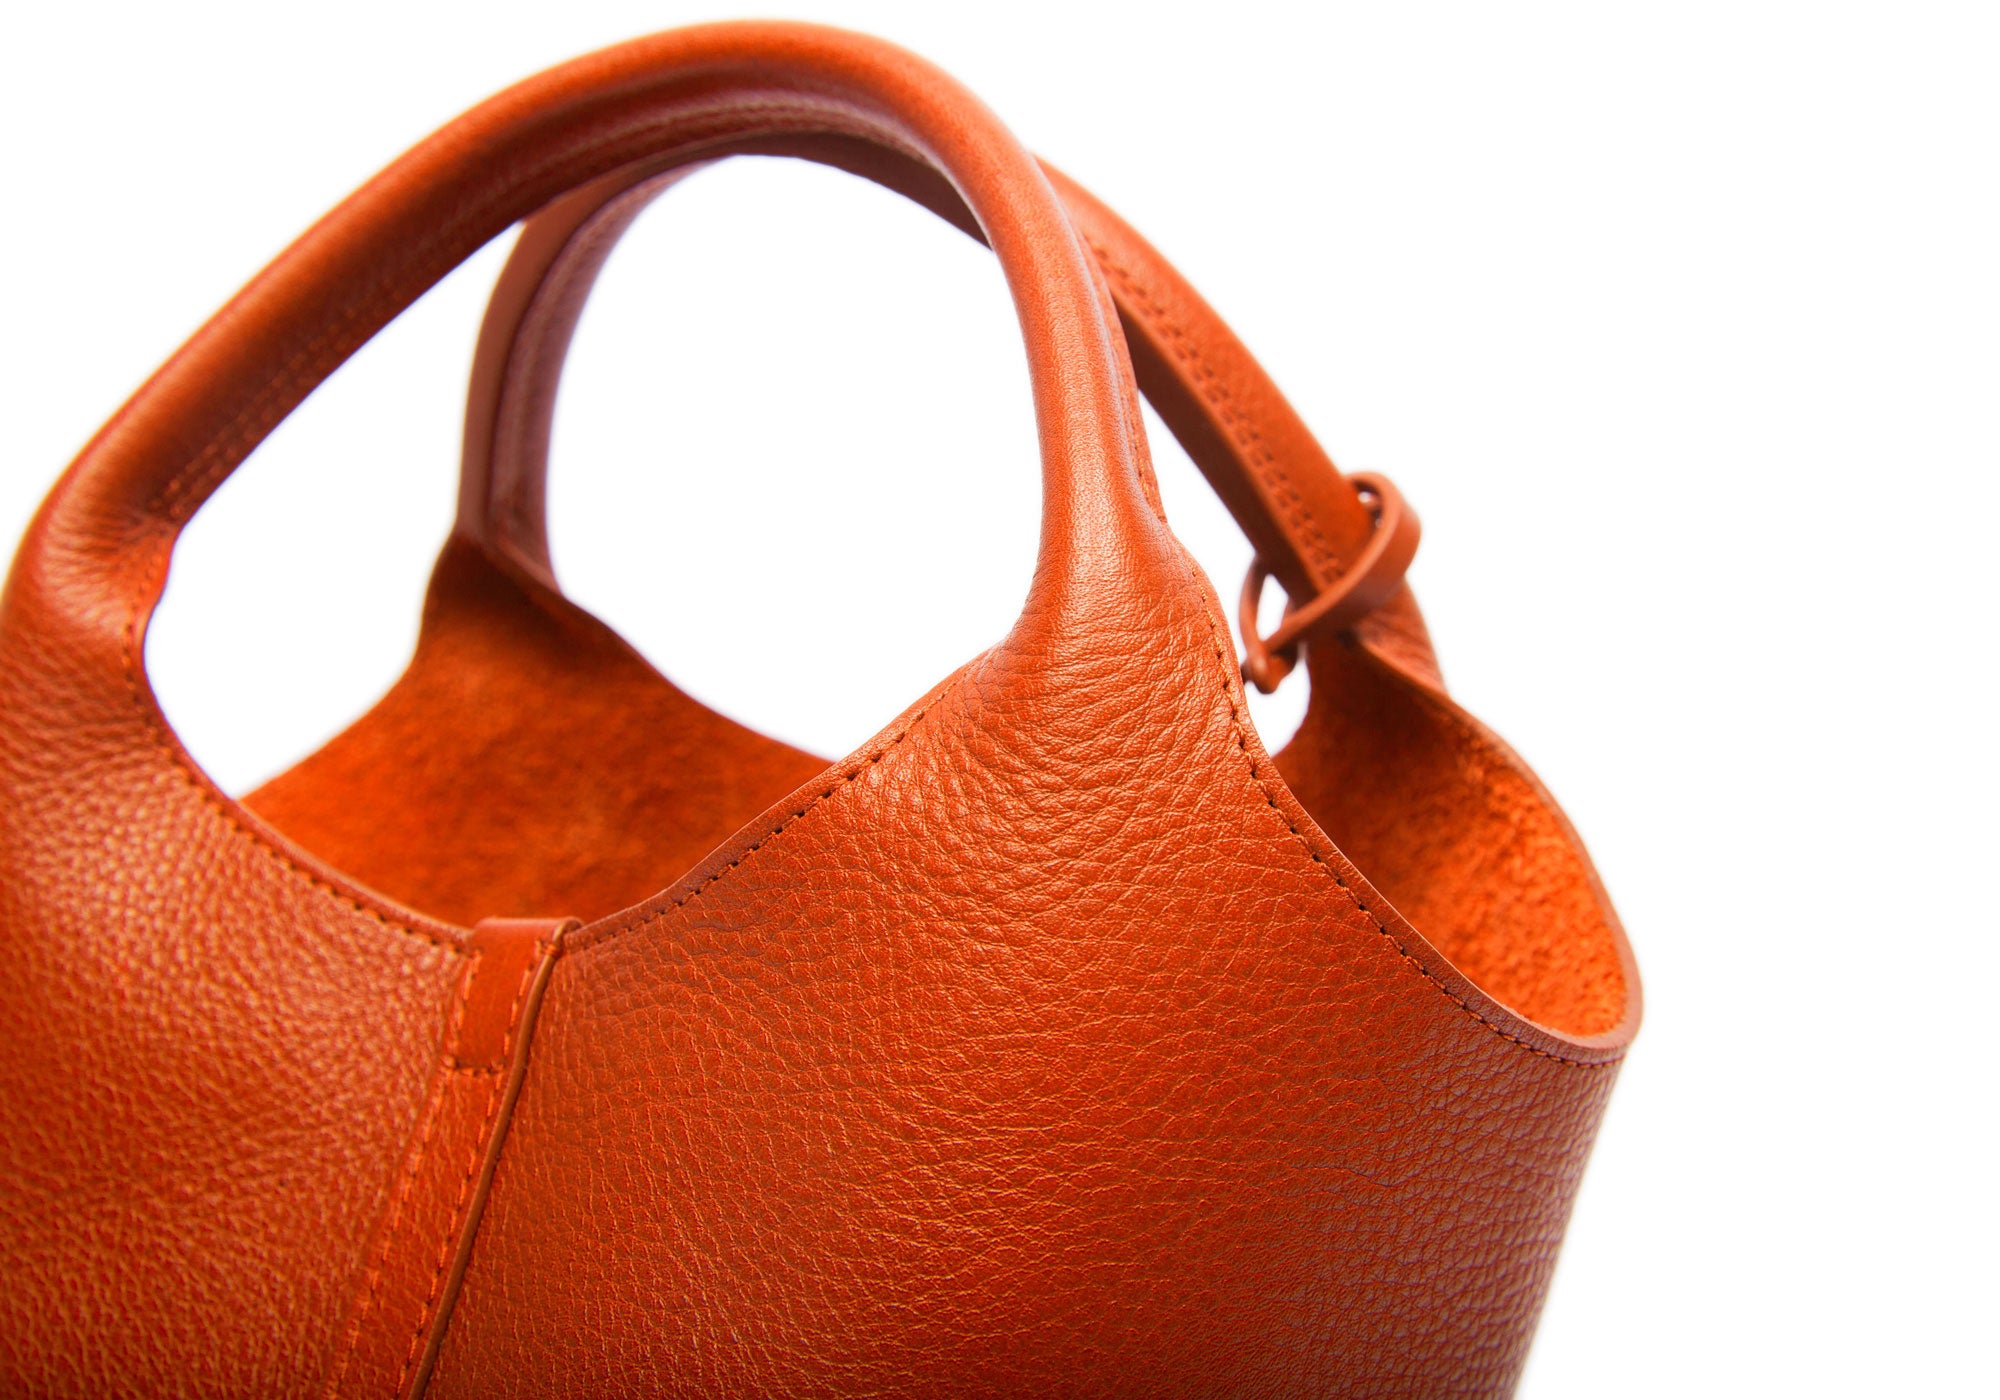 Top Leather Handle of The One-Piece Bag Orange